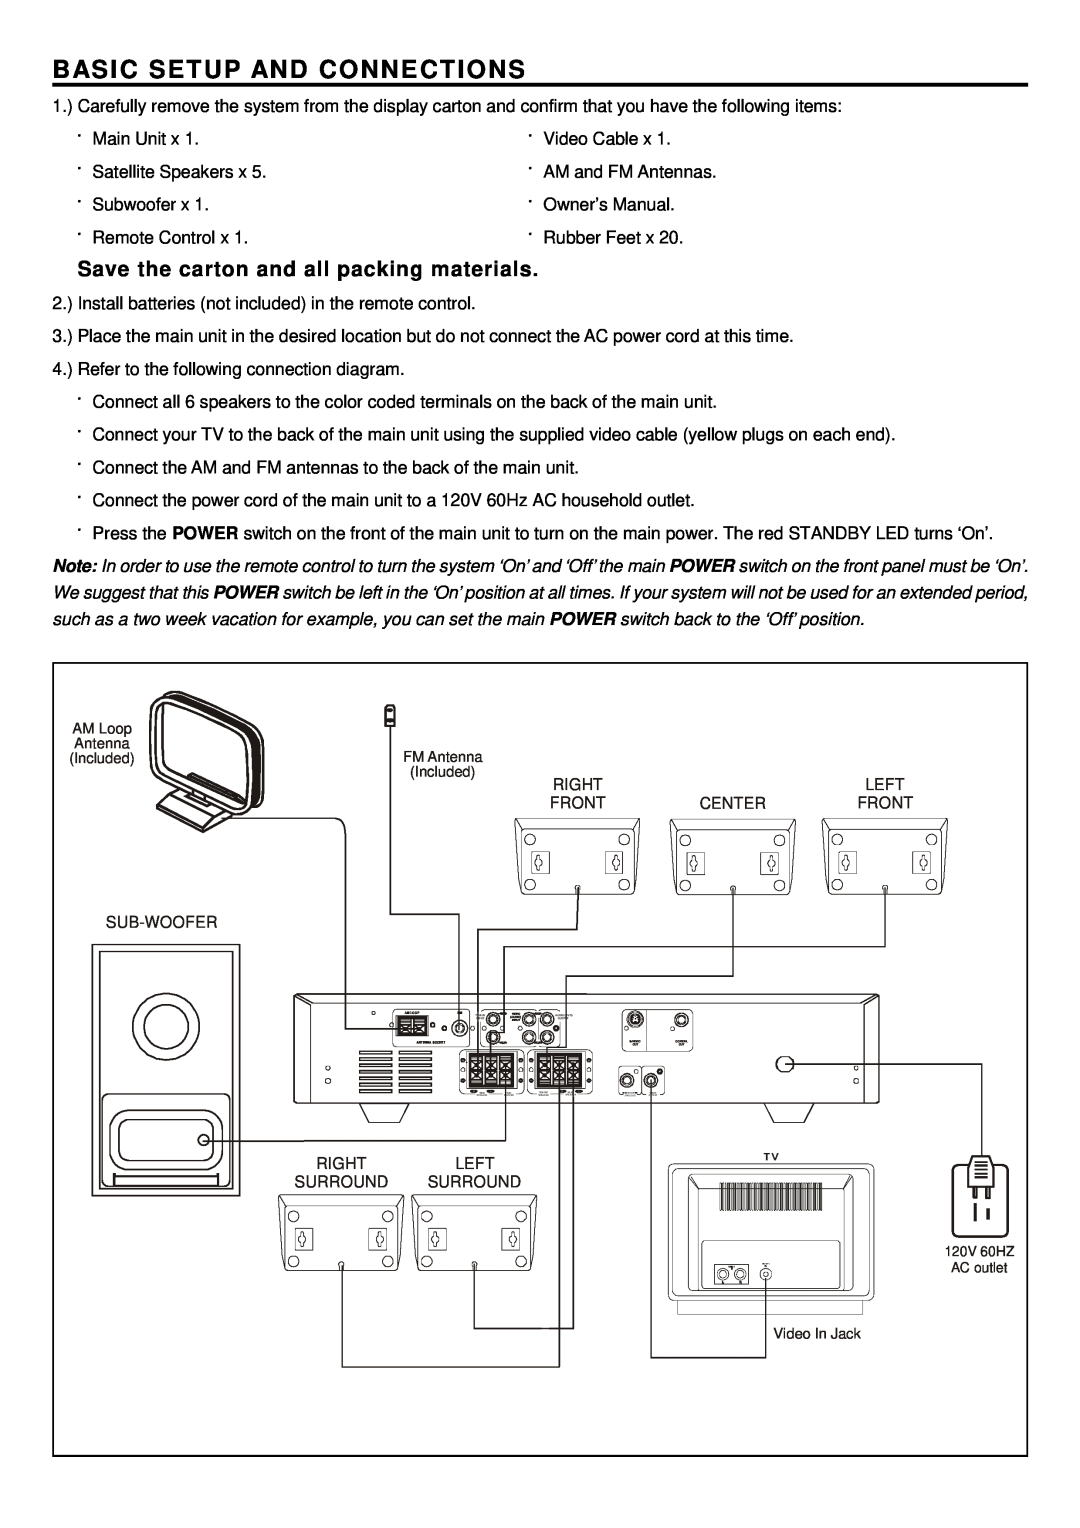 Emerson AV101 setup guide Basic Setup And Connections, Save the carton and all packing materials 